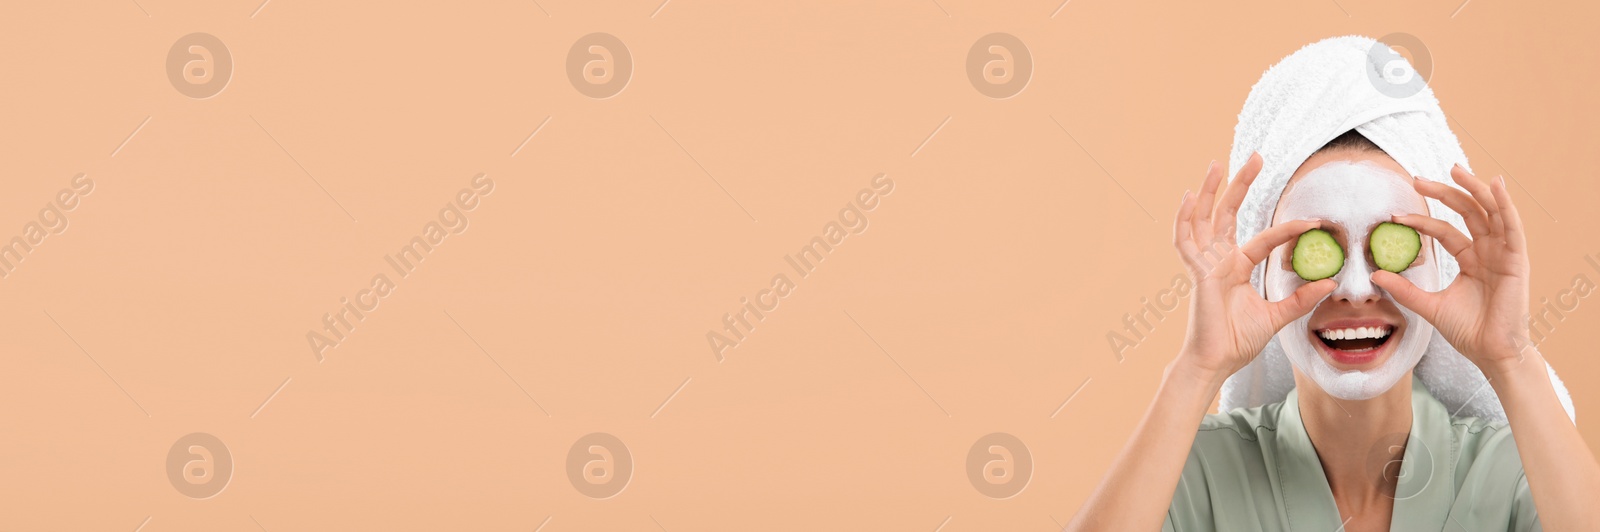 Image of Spa treatment. Happy woman with face mask and cucumber slices on pale orange background. Banner design with space for text